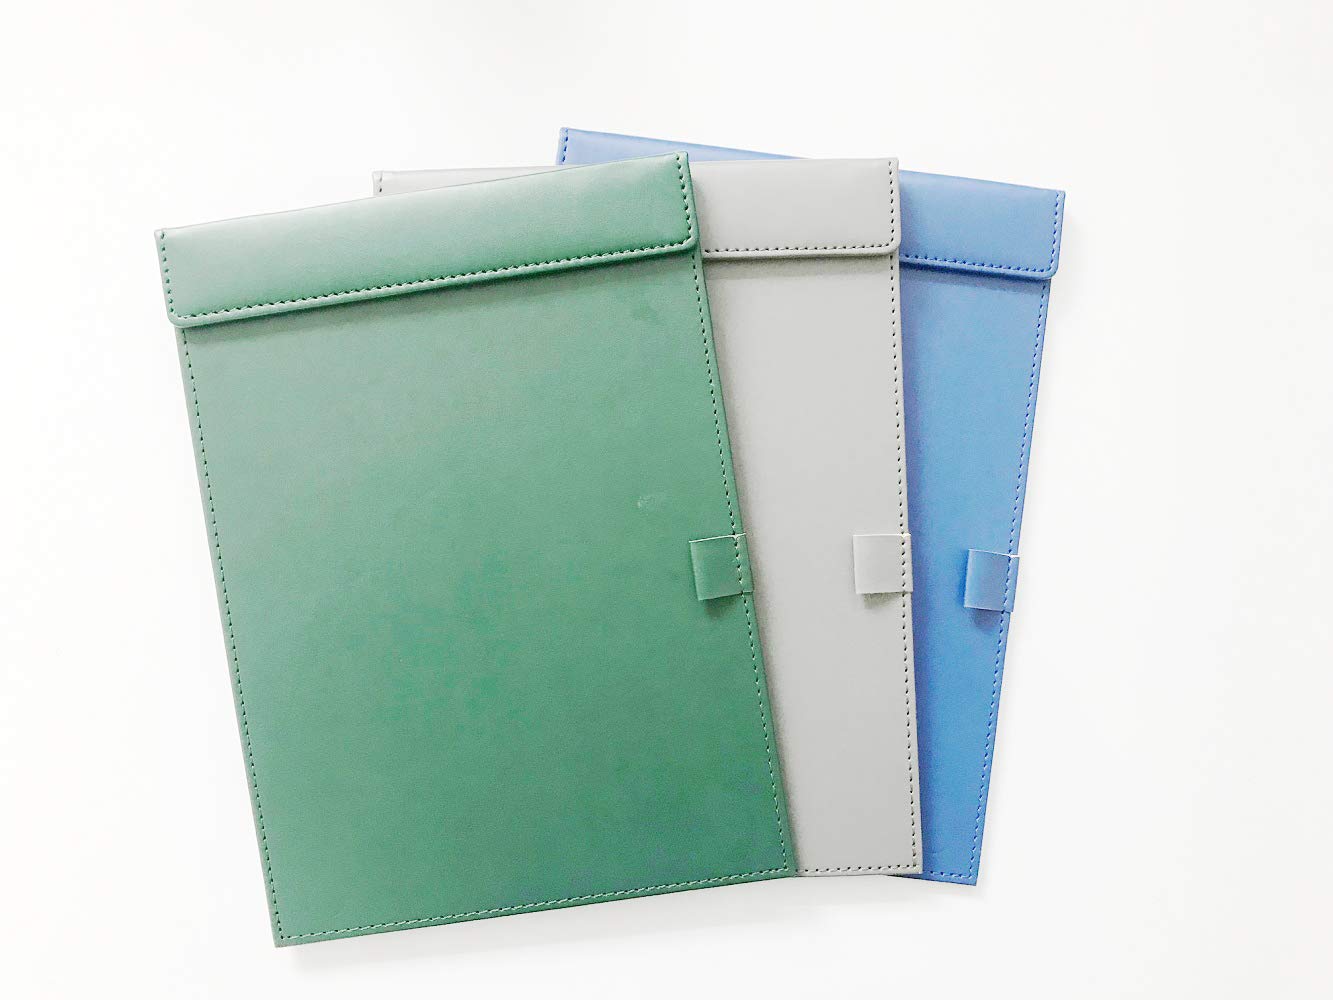 NJ Ultra Silk Smooth PU Leather Conference Writing Pad Clipboard, Business Meeting Magnetic Pad with Pen Holder: 3 Pcs Set : Green, Gray, Blue